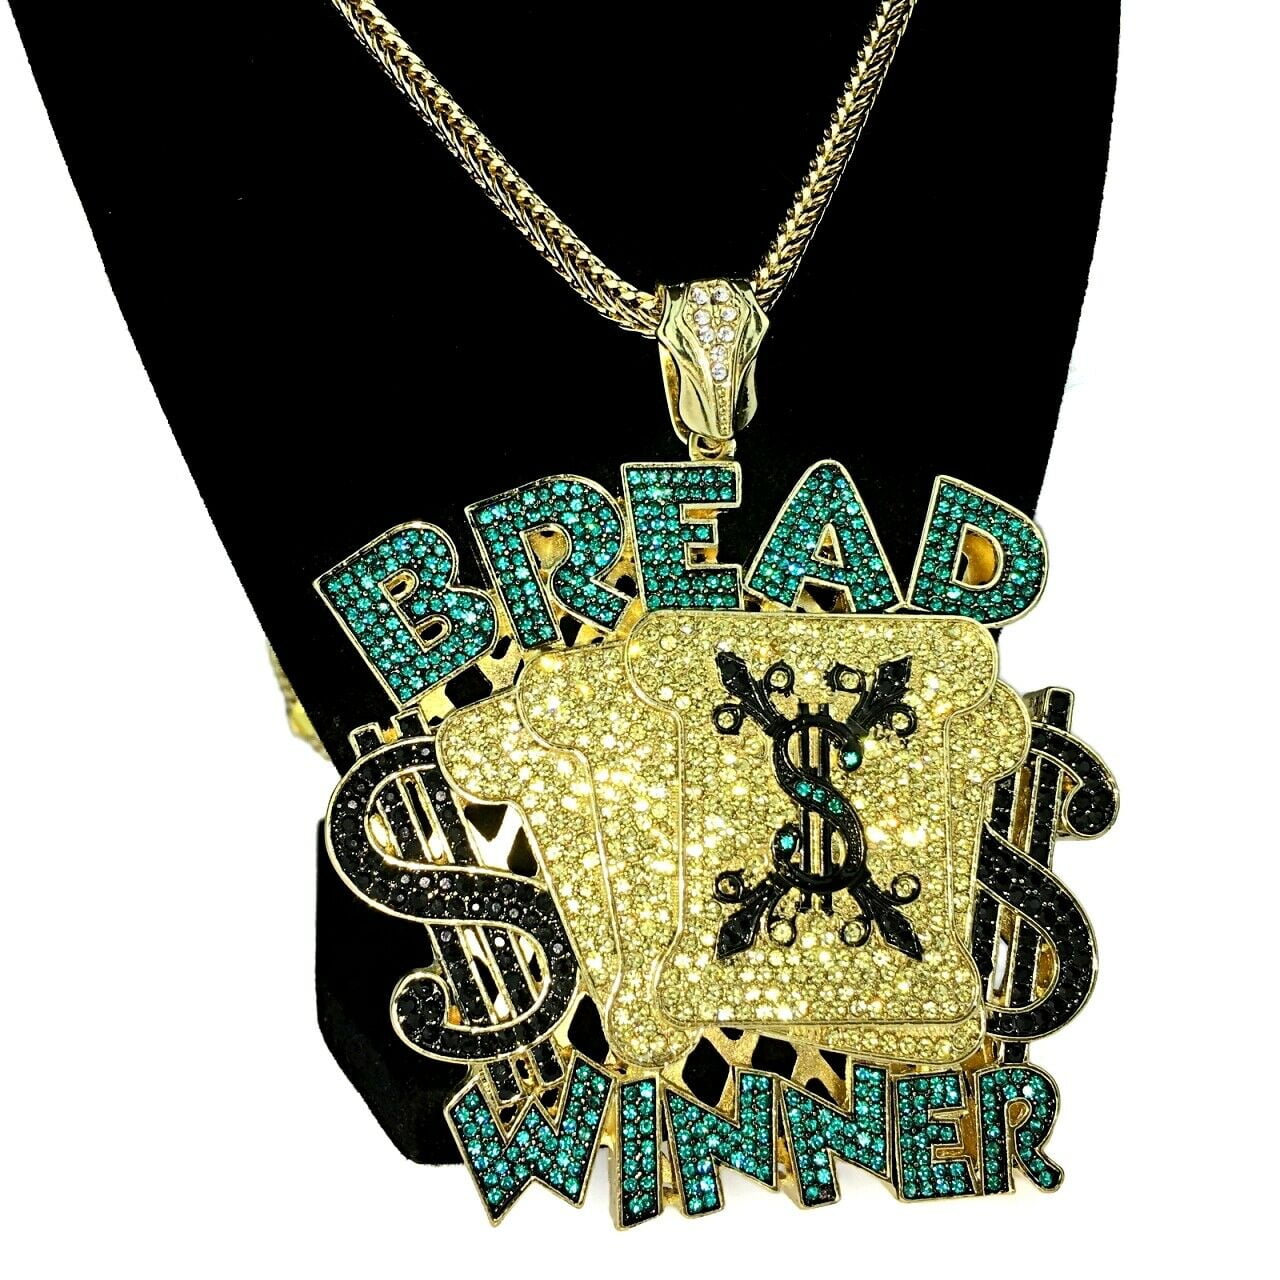 MENS NEW ICED OUT HIPHOP SILVER CASH MONEY RECORDS PENDANT FRANCO CHAIN NECKLACE 